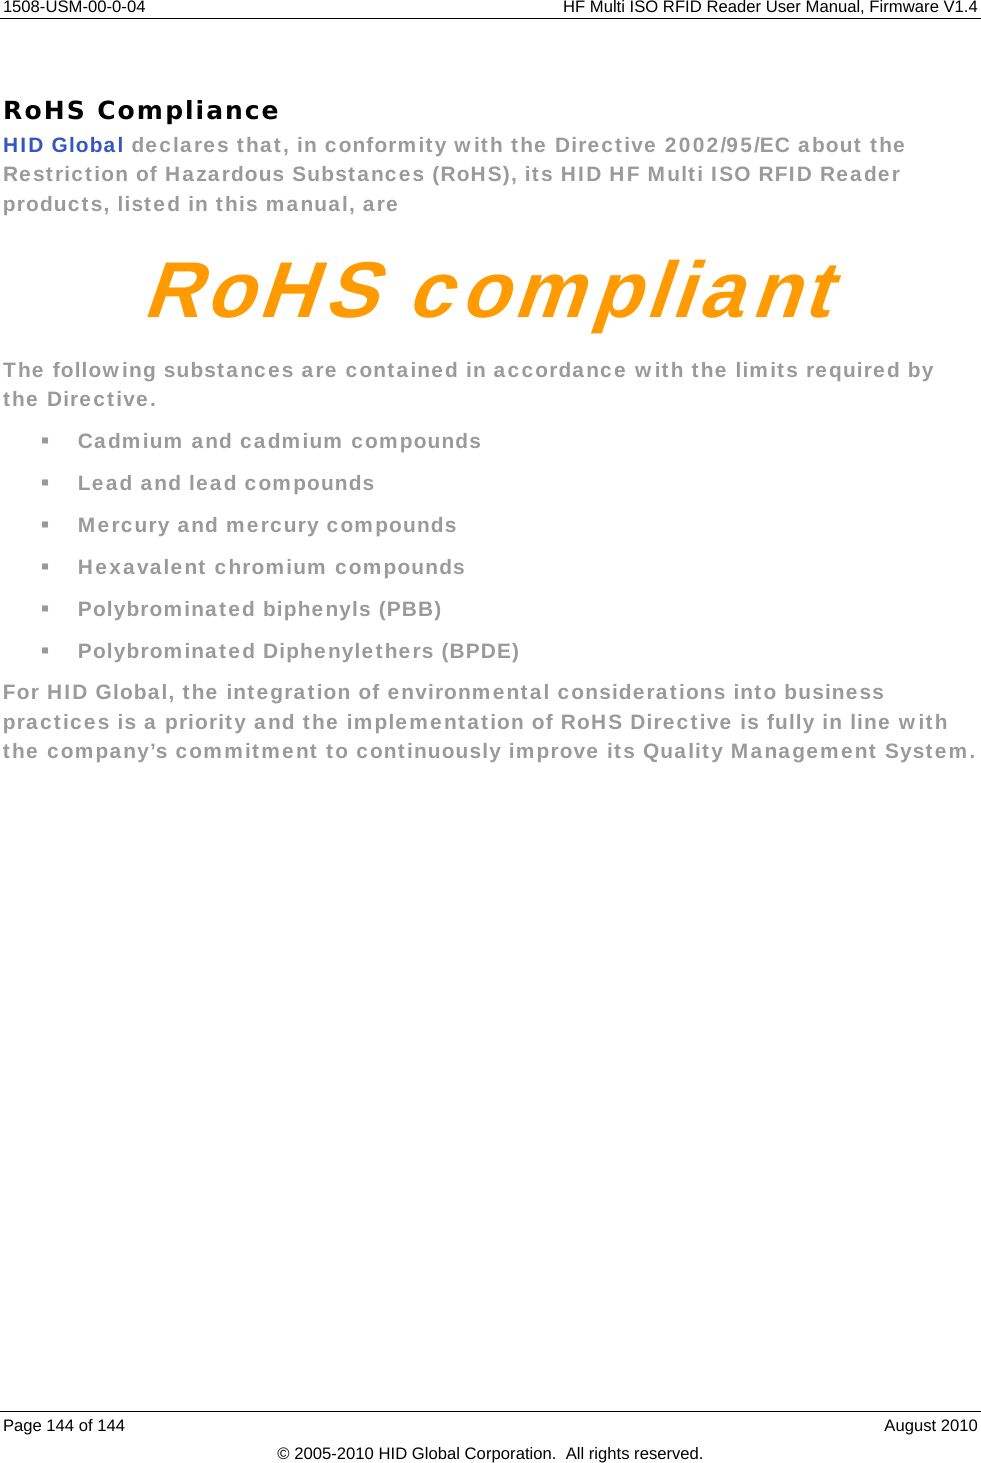     1508-USM-00-0-04    HF Multi ISO RFID Reader User Manual, Firmware V1.4 Page 144 of 144    August 2010 © 2005-2010 HID Global Corporation.  All rights reserved.  RoHS Compliance HID Global declares that, in conformity with the Directive 2002/95/EC about the Restriction of Hazardous Substances (RoHS), its HID HF Multi ISO RFID Reader products, listed in this manual, are RoHS compliantThe following substances are contained in accordance with the limits required by the Directive.  Cadmium and cadmium compounds  Lead and lead compounds  Mercury and mercury compounds  Hexavalent chromium compounds  Polybrominated biphenyls (PBB)  Polybrominated Diphenylethers (BPDE) For HID Global, the integration of environmental considerations into business practices is a priority and the implementation of RoHS Directive is fully in line with the company’s commitment to continuously improve its Quality Management System. 